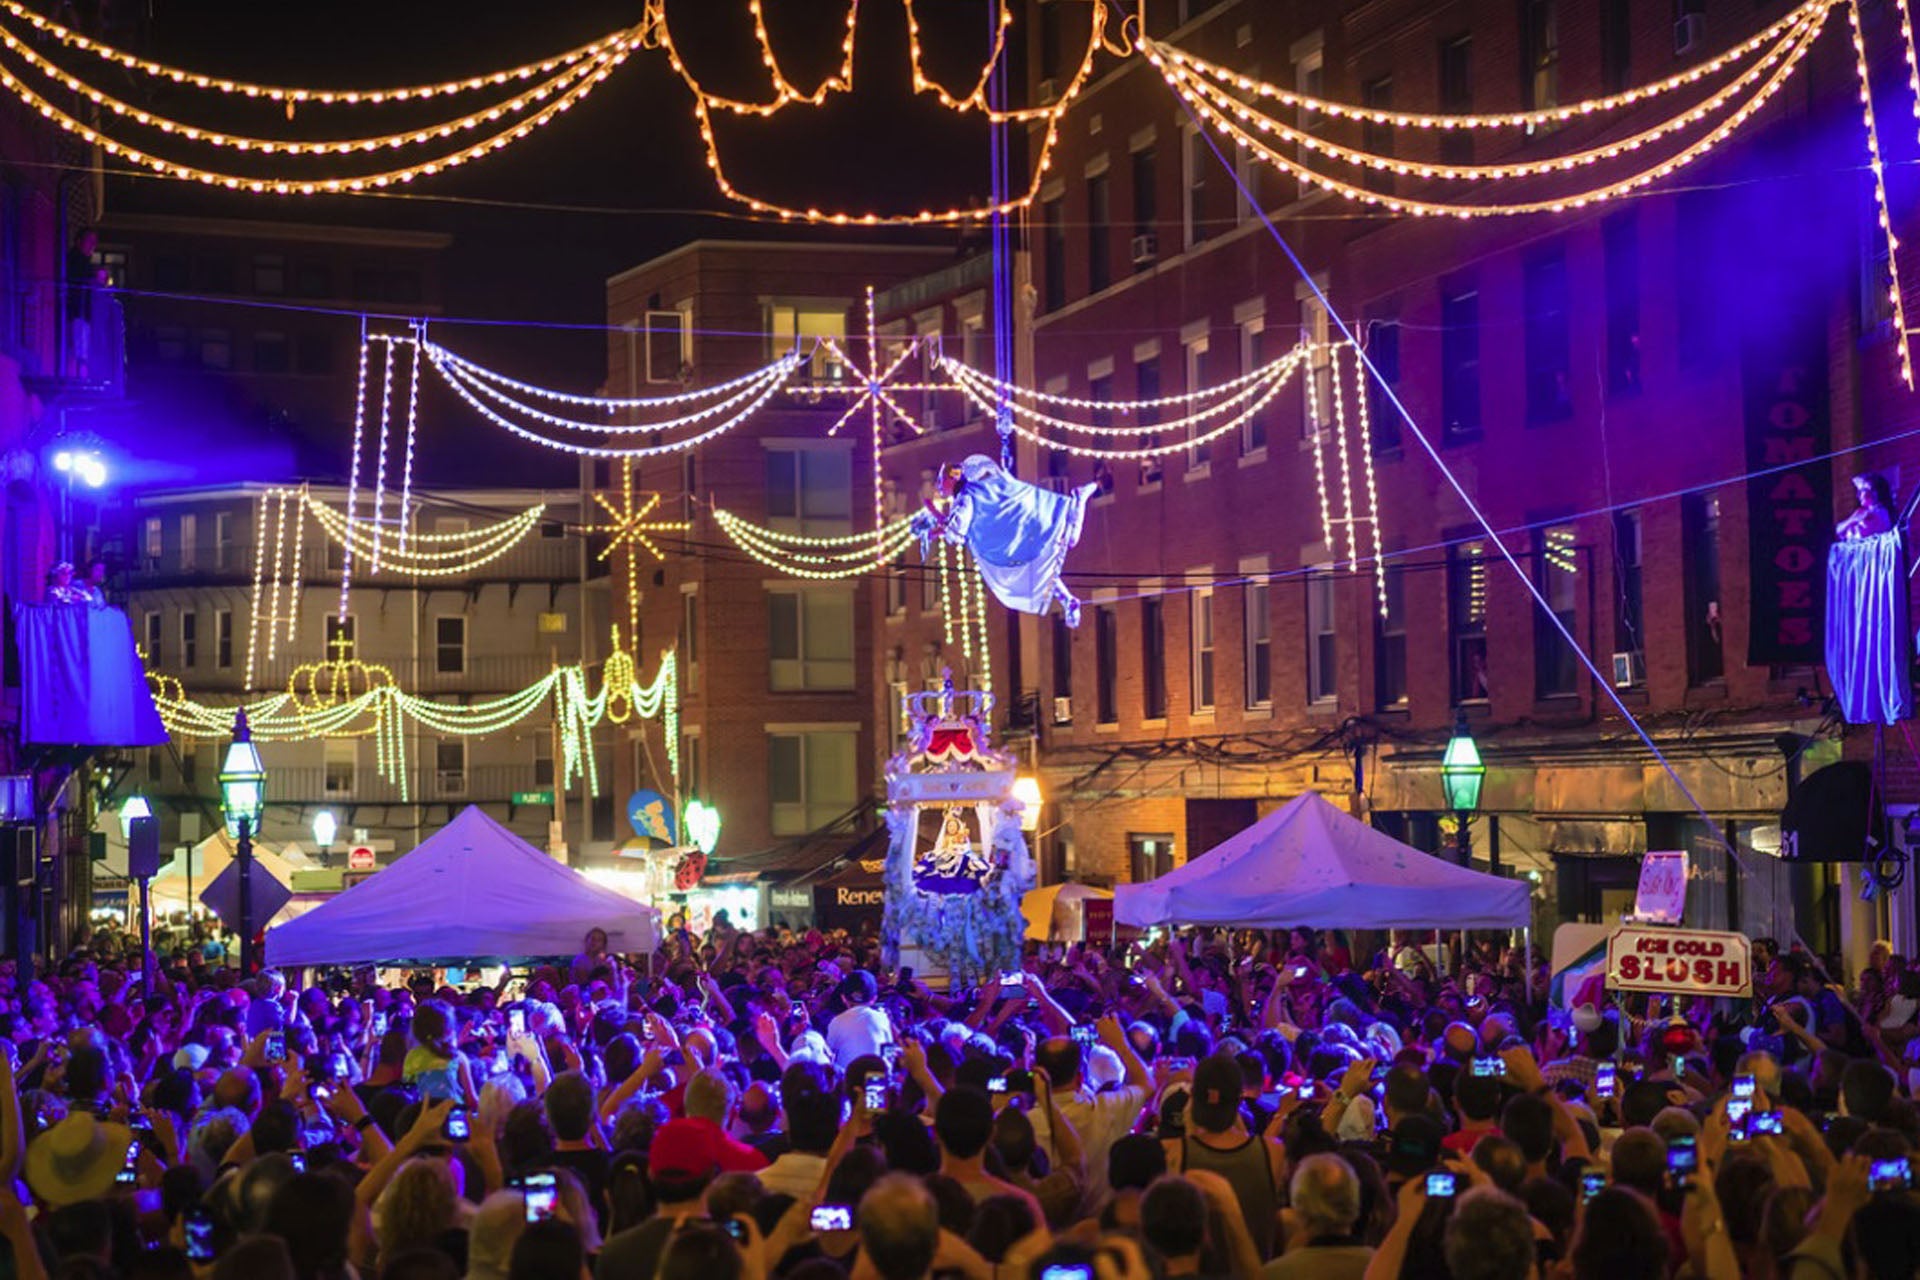 Visit Boston’s oldest continuous Italian festival, the Fisherman’s Feast